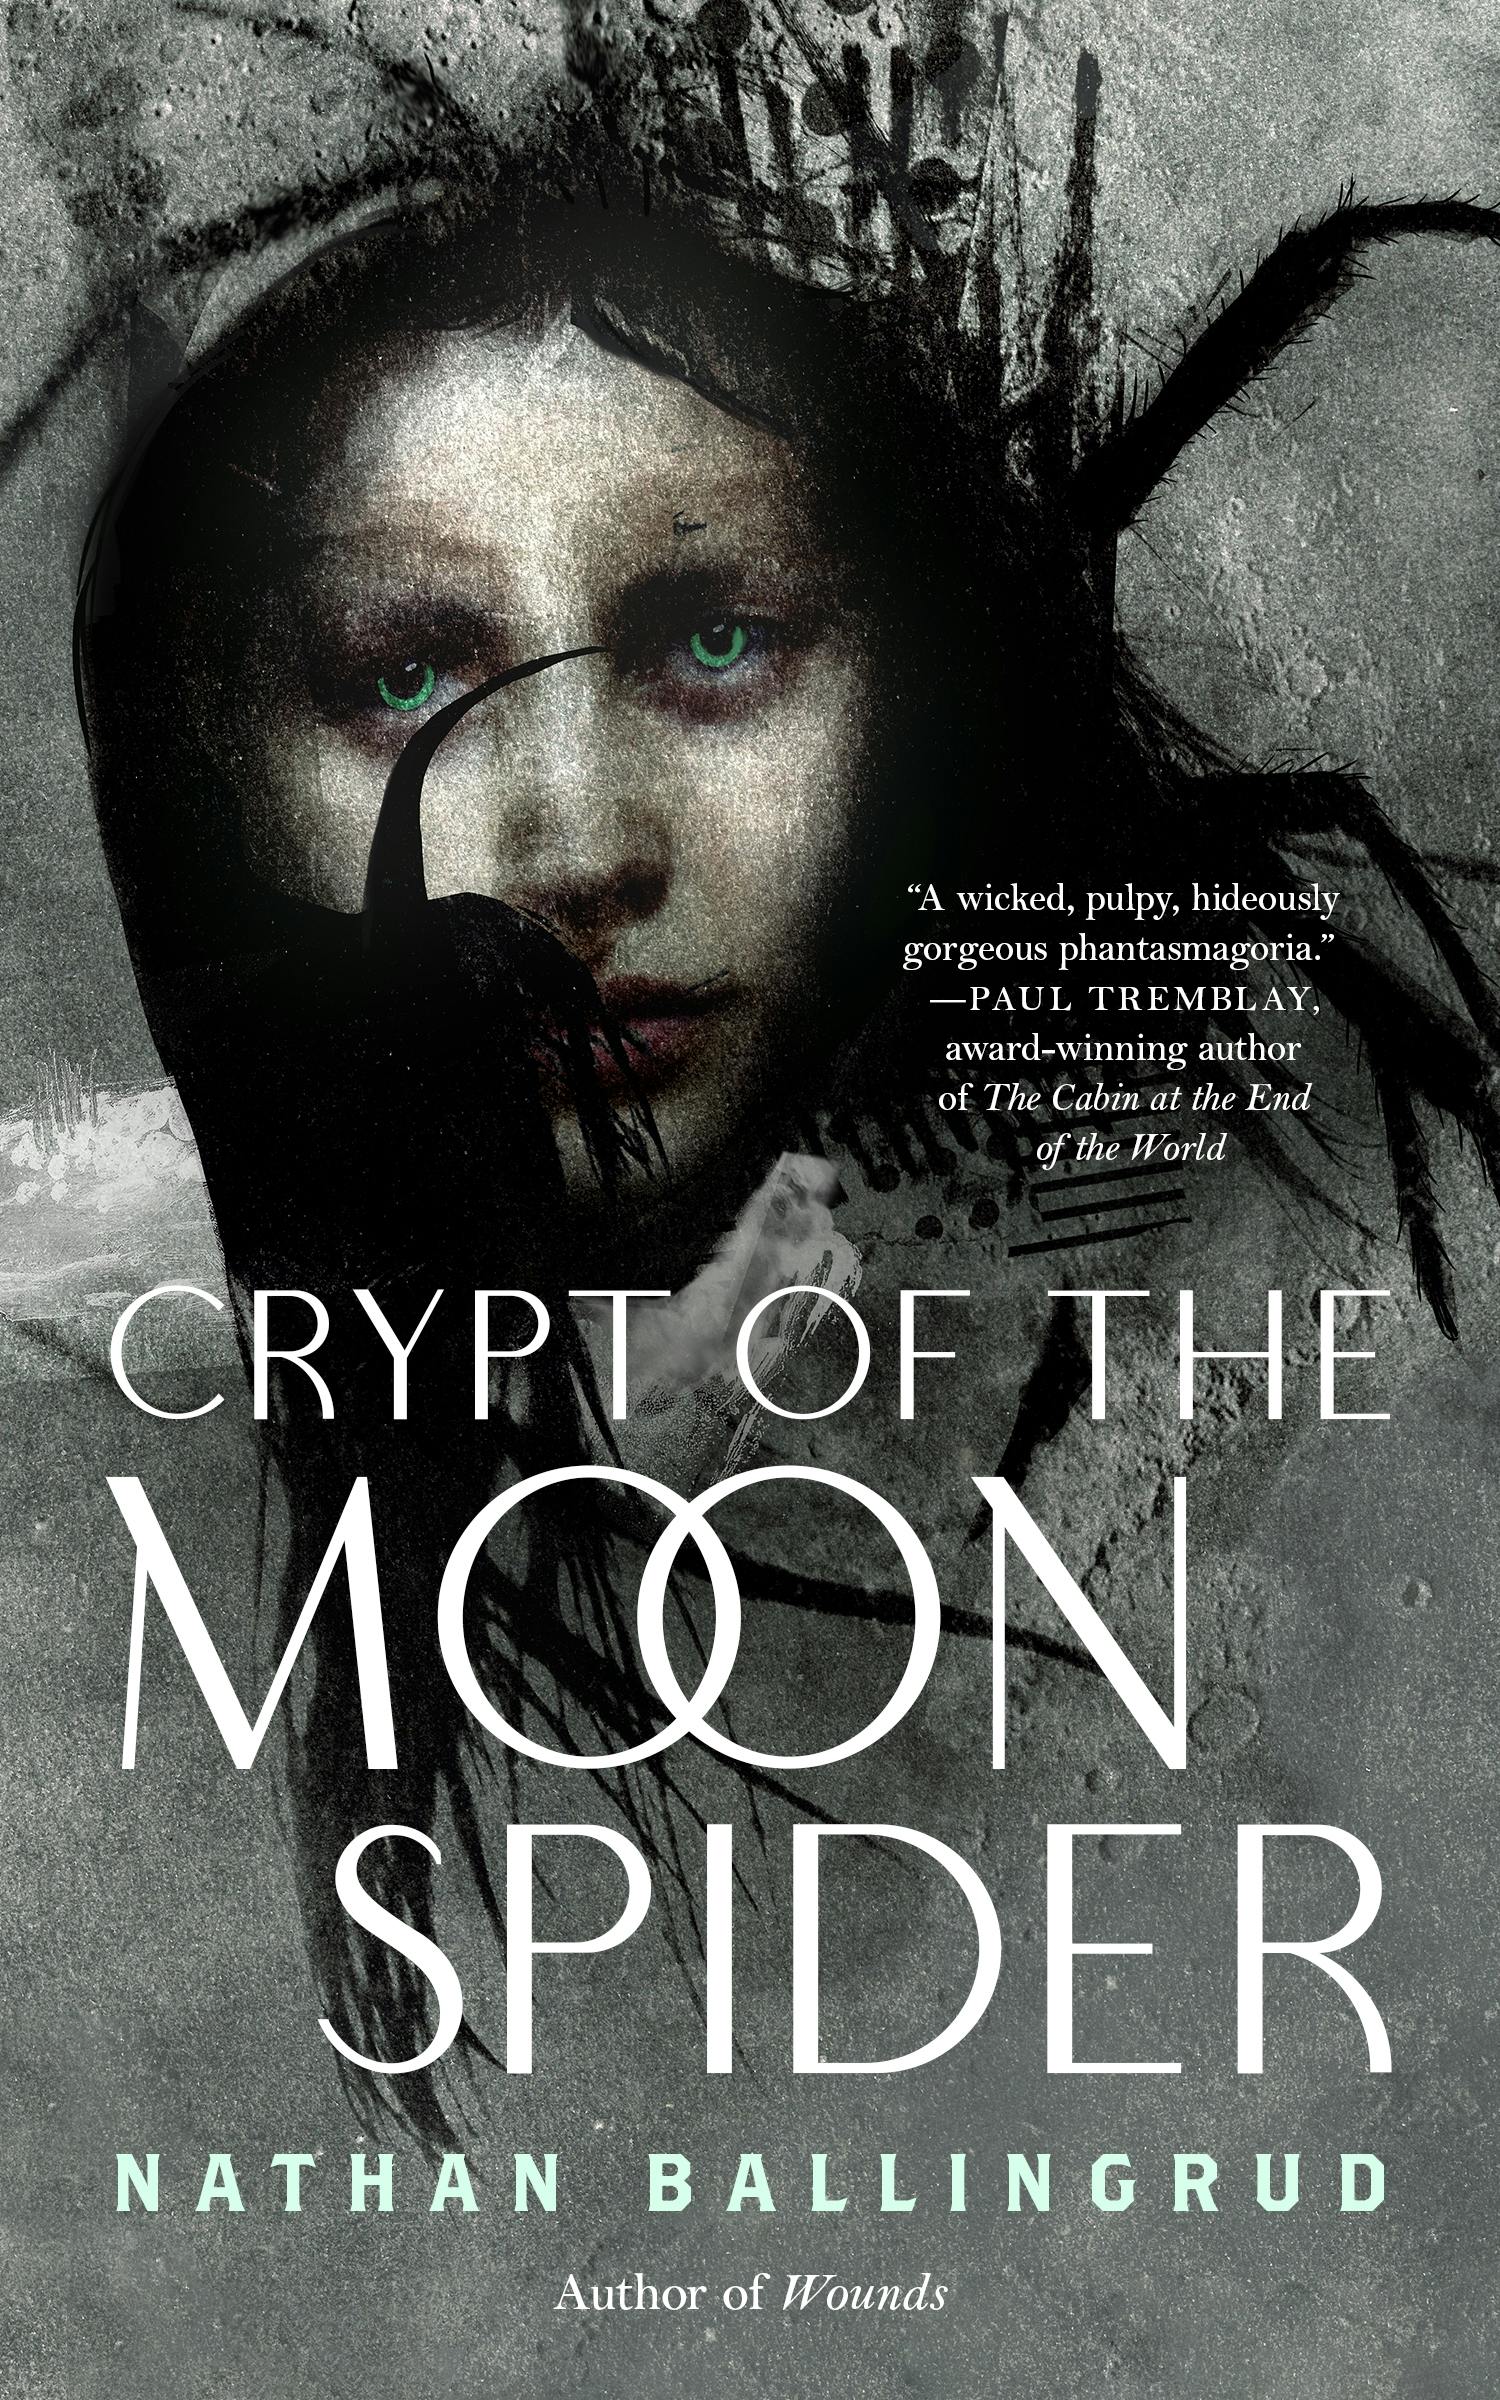 Cover for the book titled as: Crypt of the Moon Spider